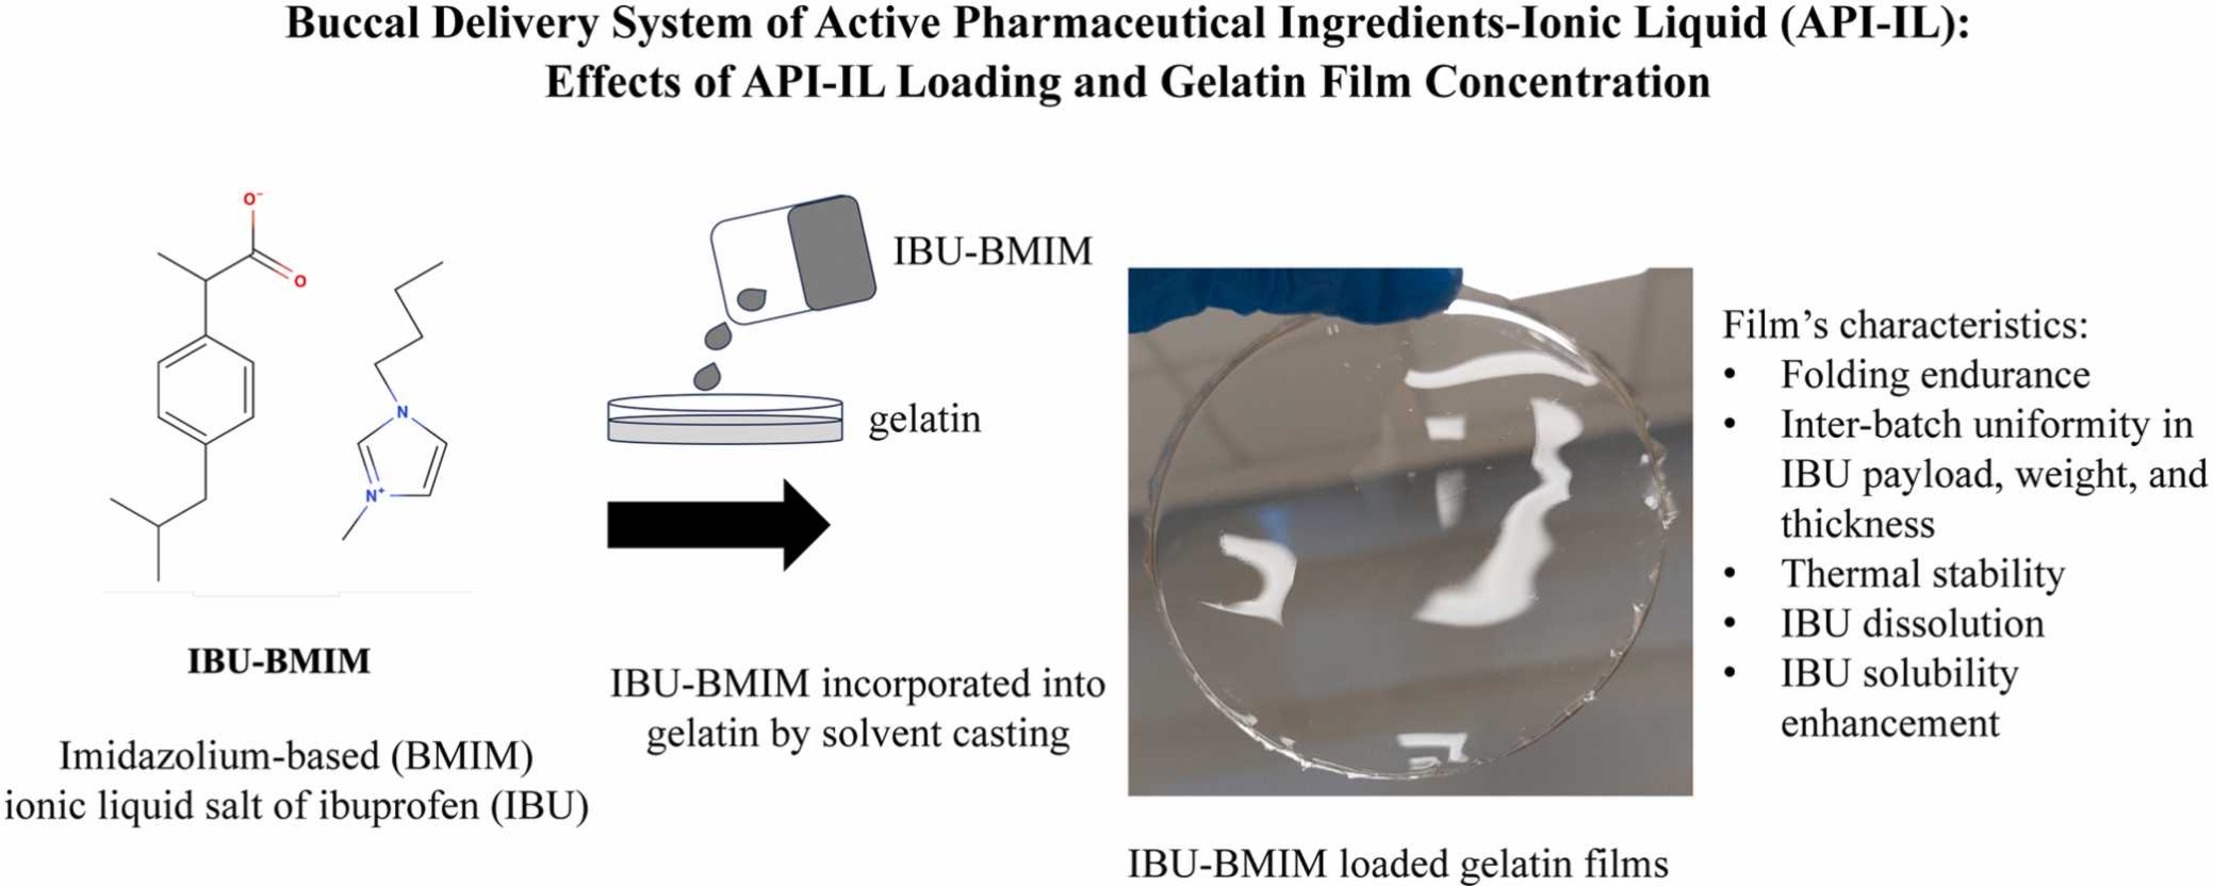 Buccal delivery system of active pharmaceutical ingredients-ionic liquid (API-IL): Effects of API-IL loading and gelatin film concentration